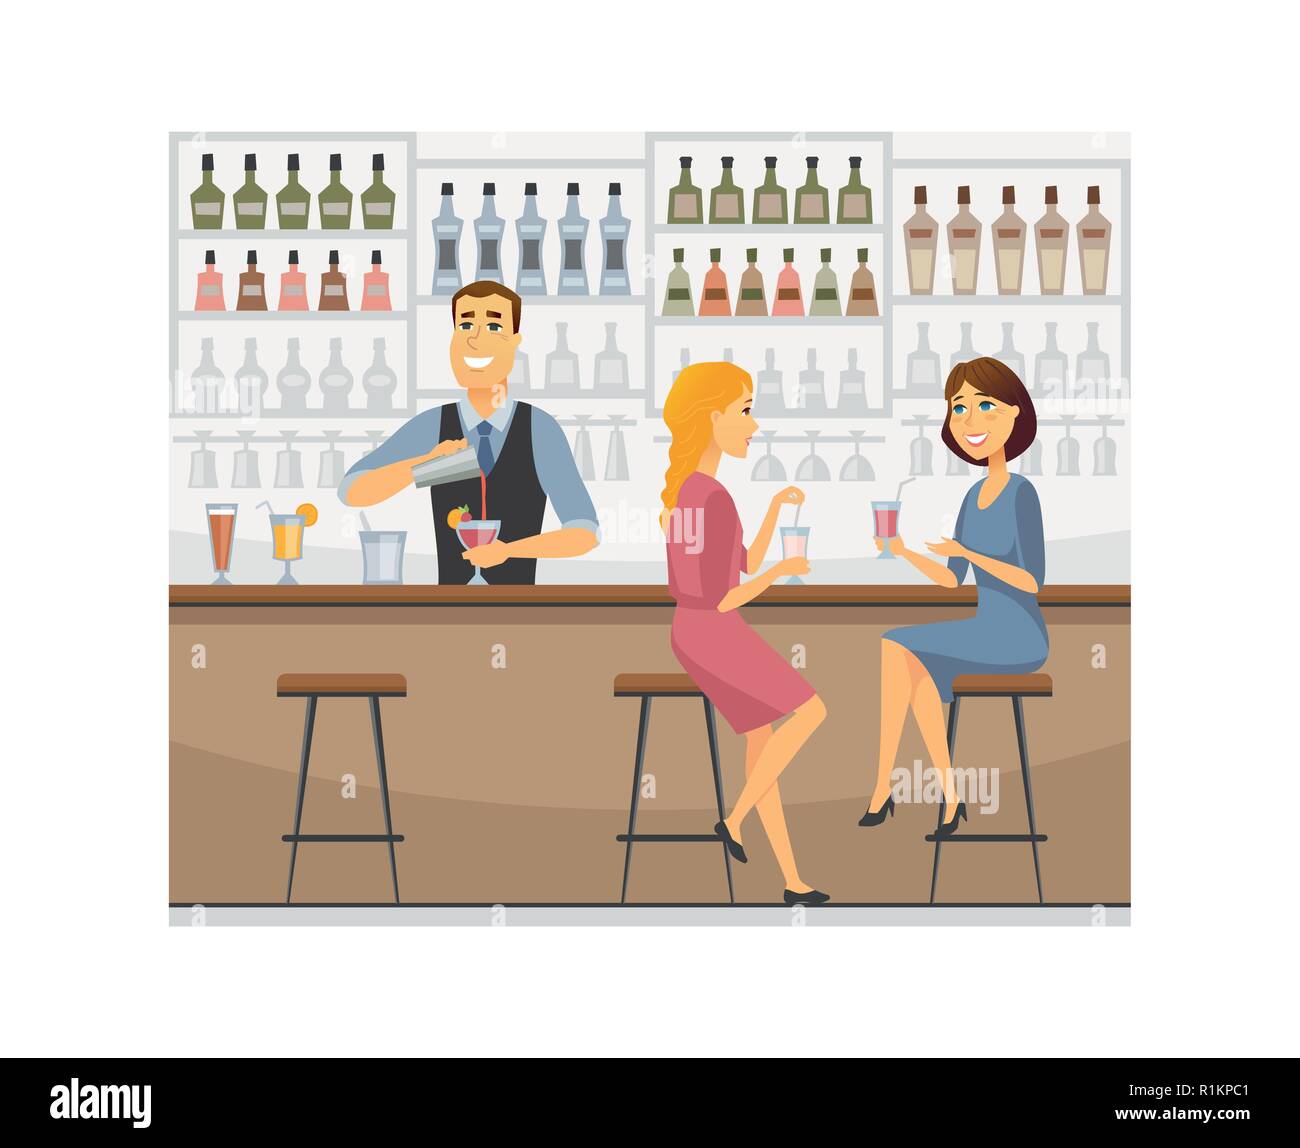 Bartender at work - cartoon people characters illustration Stock Vector  Image & Art - Alamy